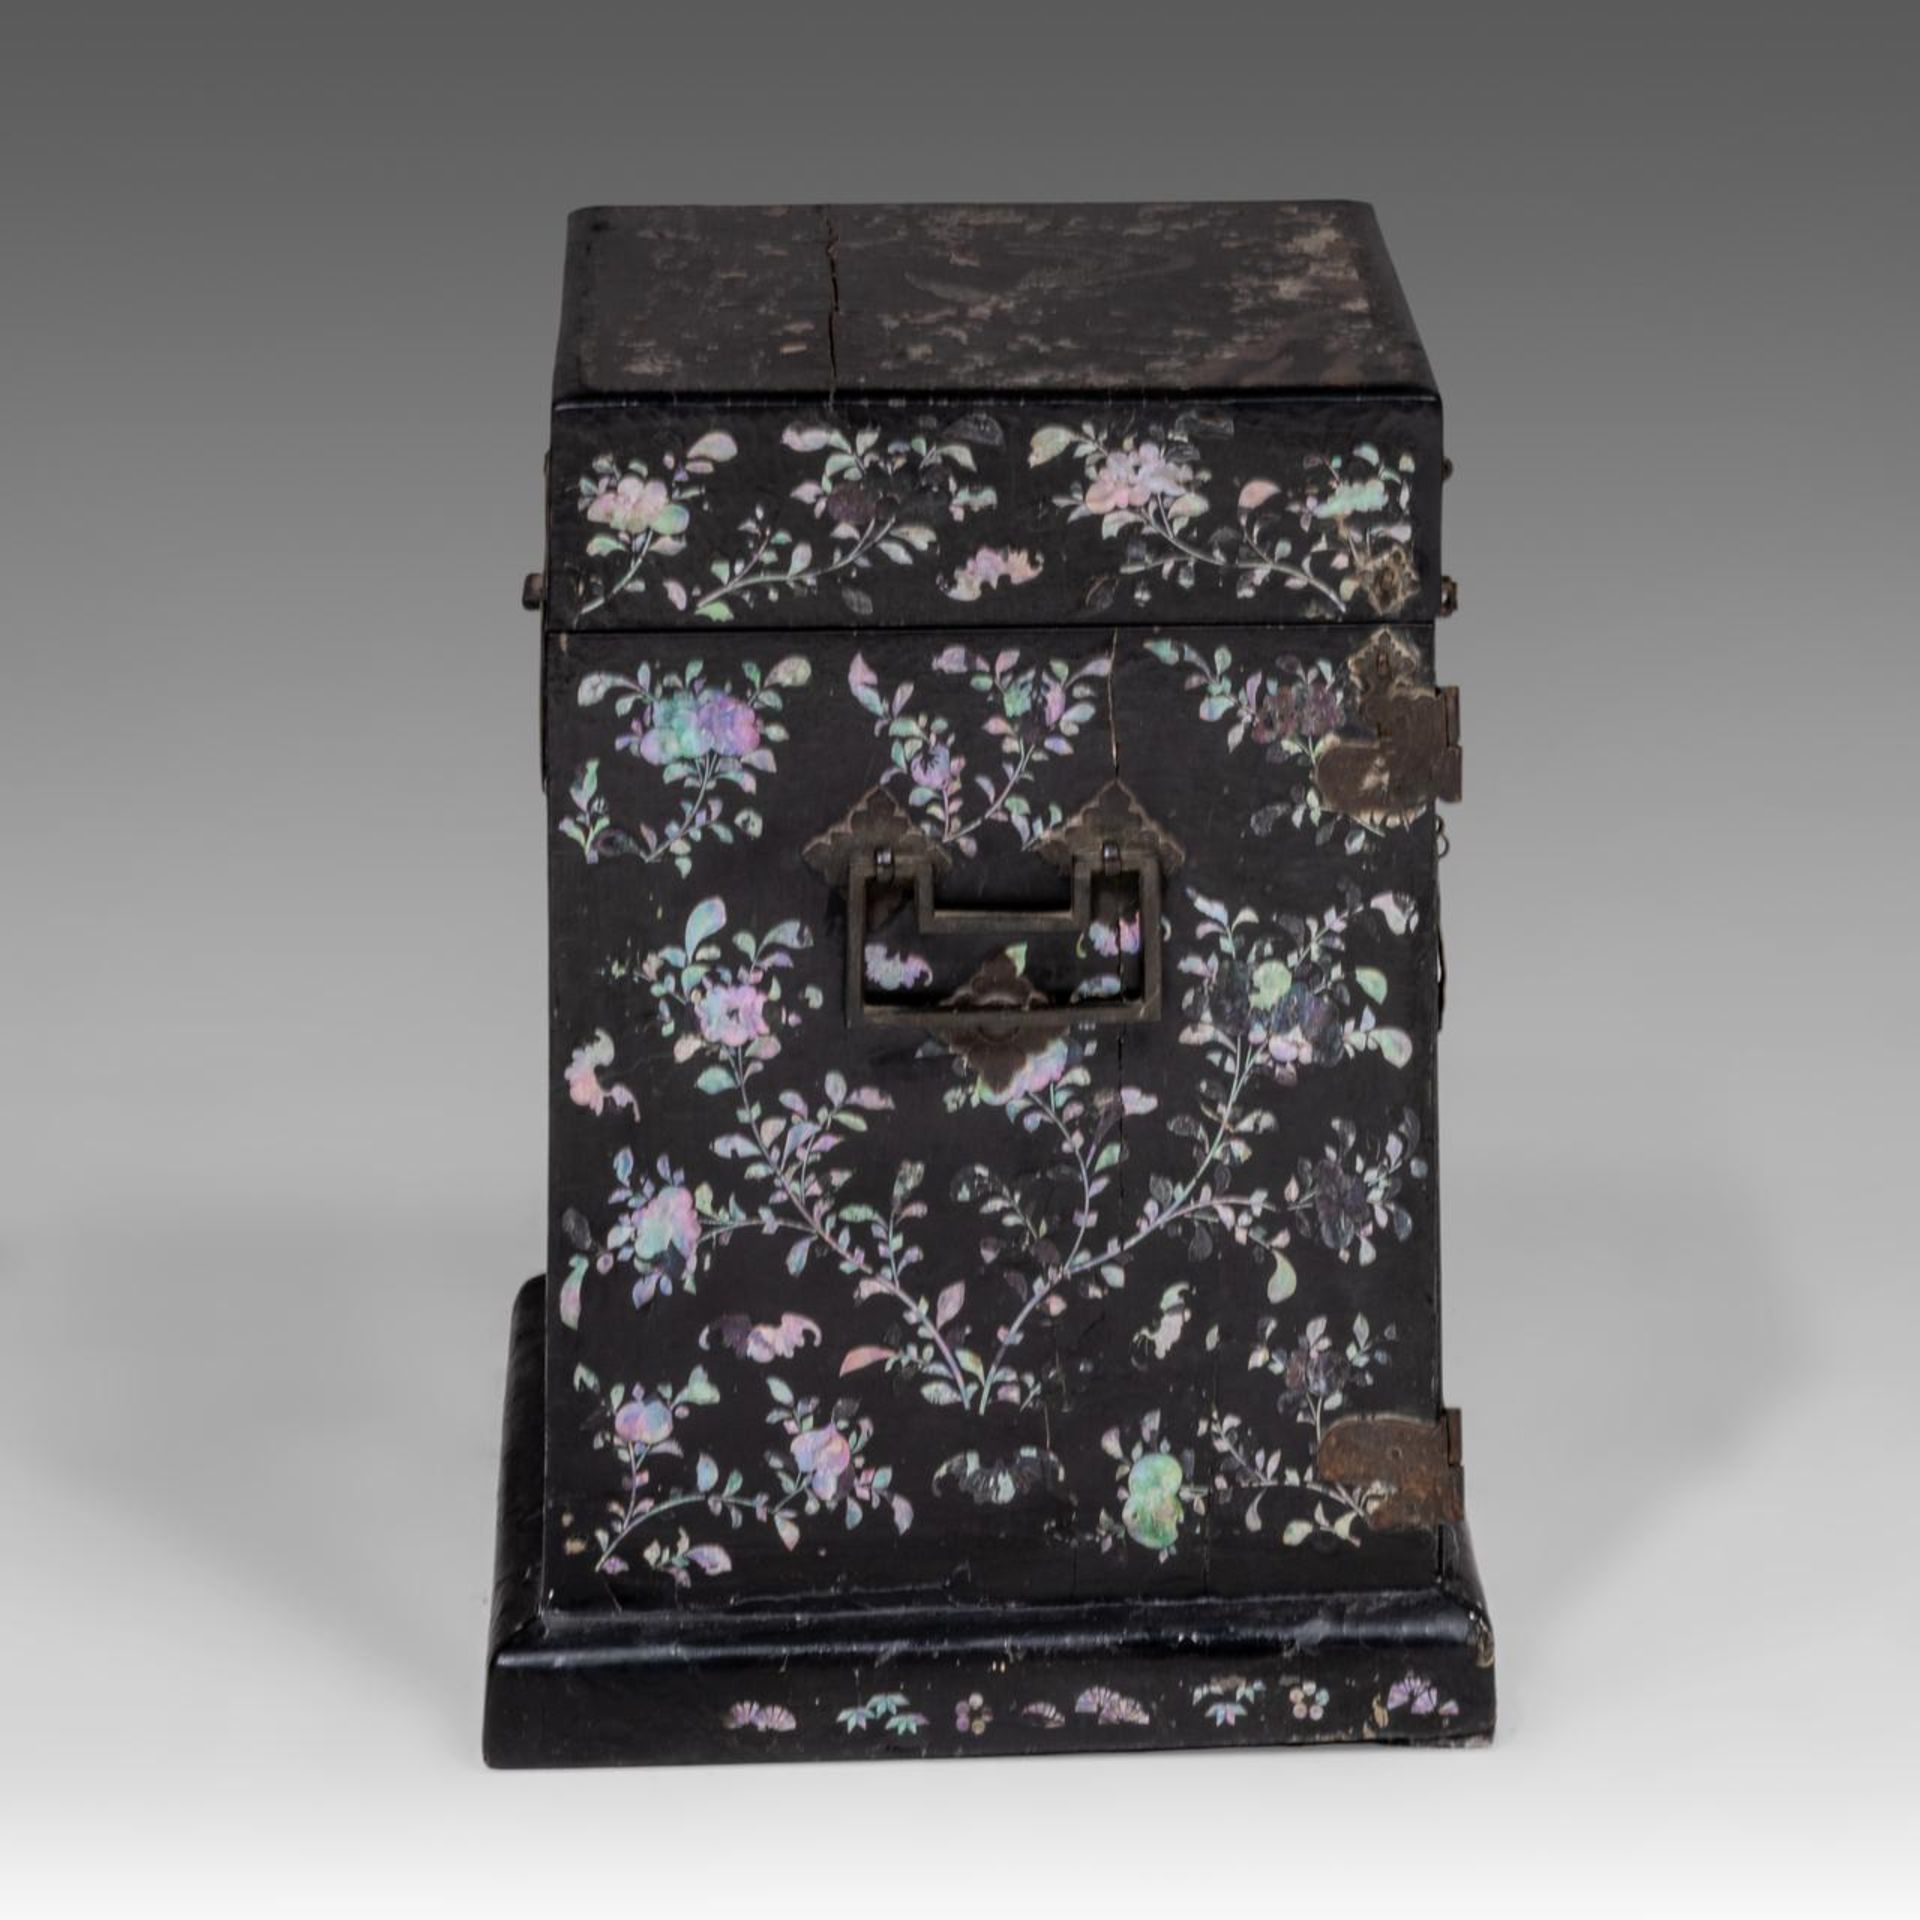 A Chinese lac burgaute travelling writing box or table cabinet, 17thC/18thC, H 31 - 28,5 x 21 cm - Image 7 of 7